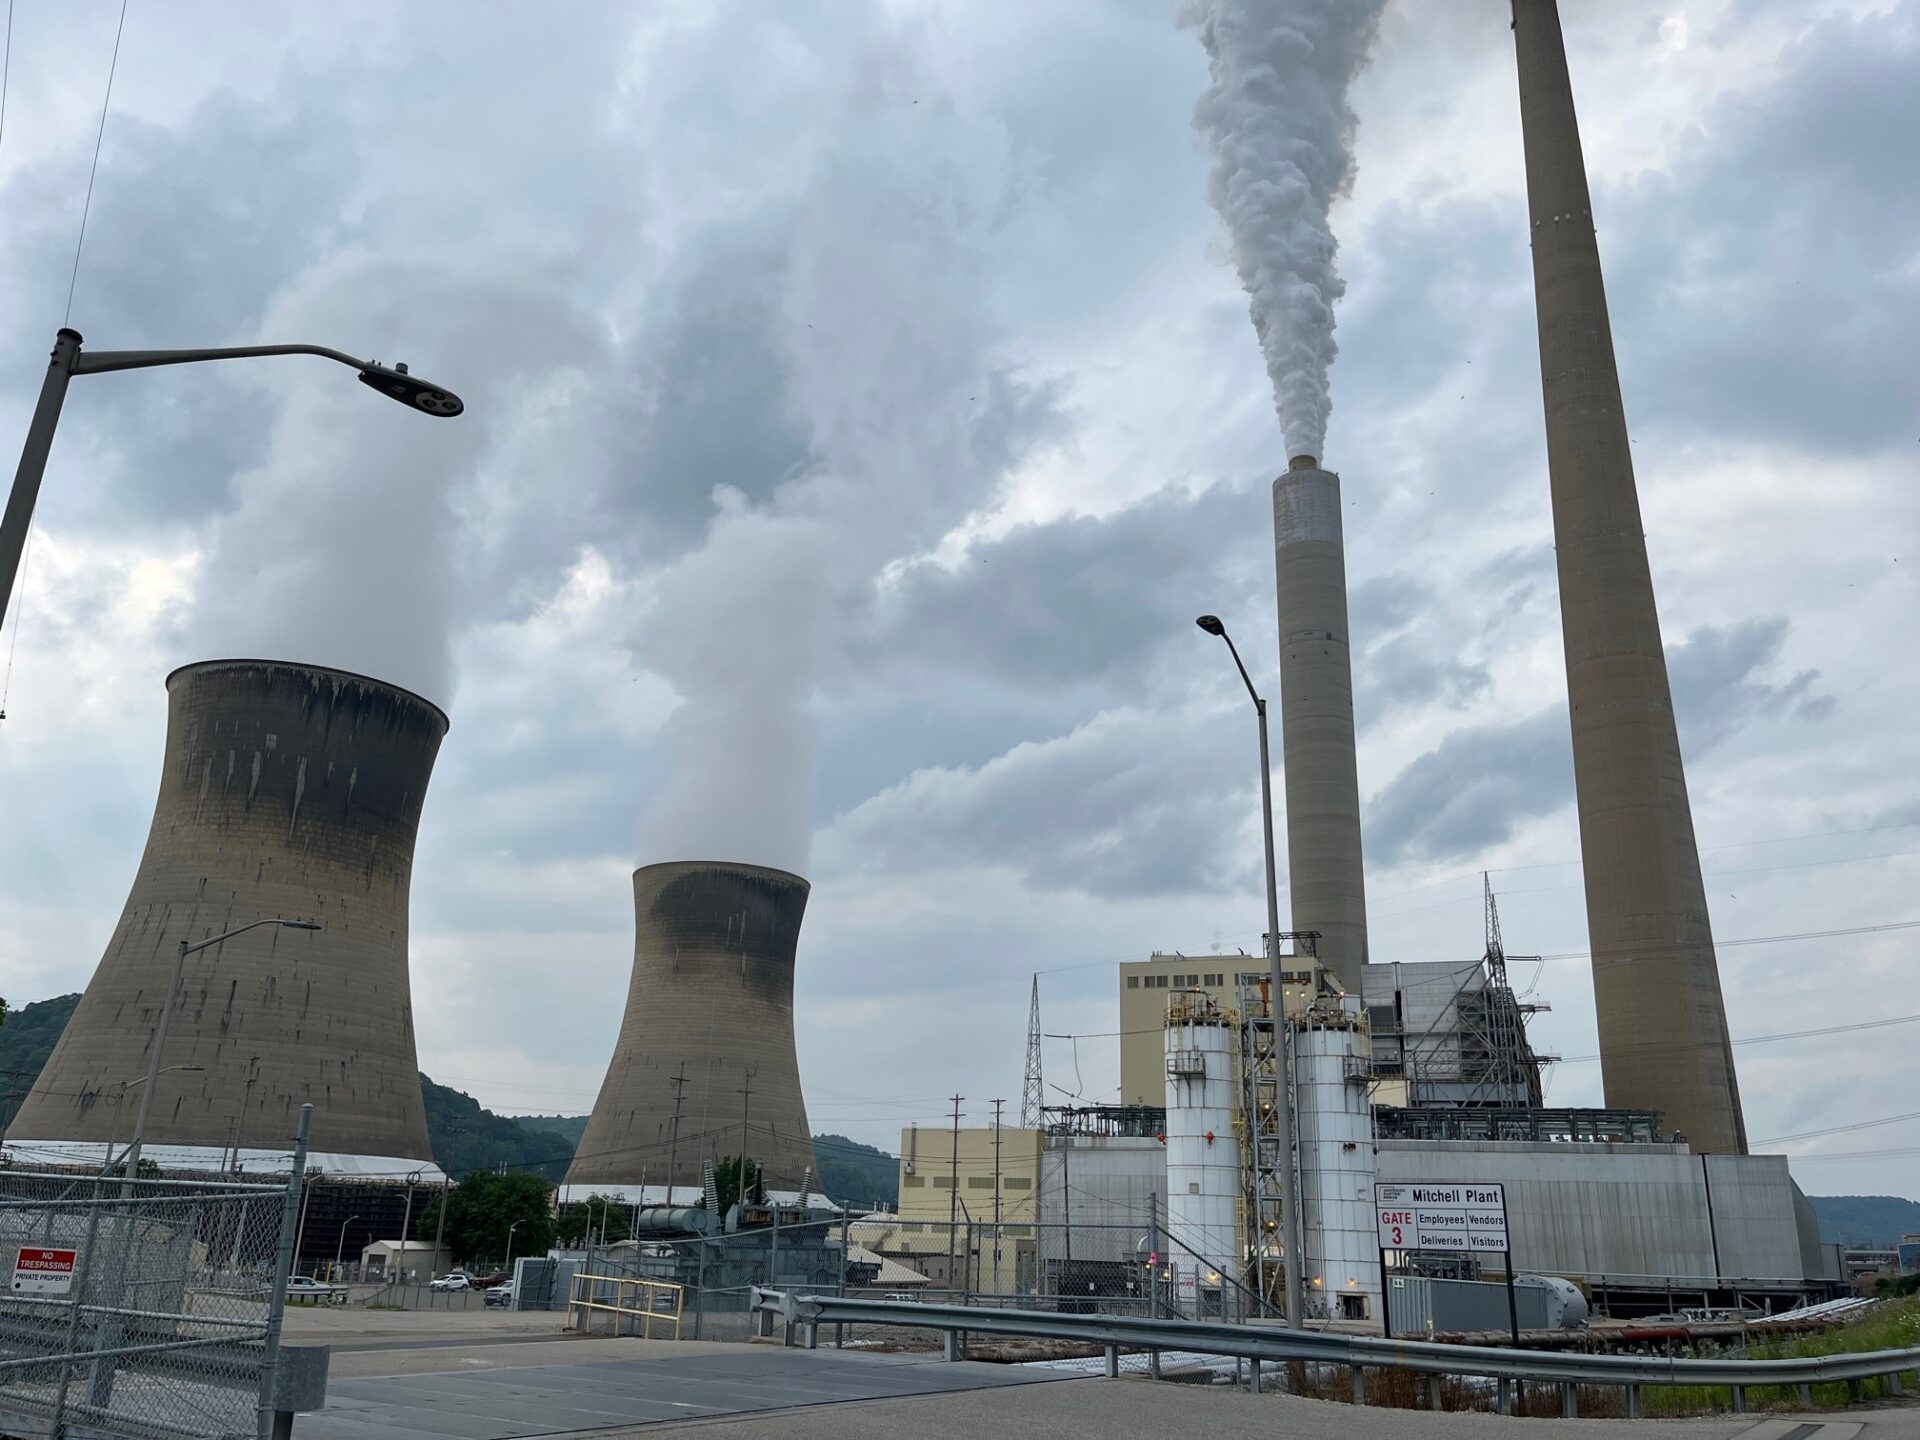 Appalachian Power Could Take Legal Action Against PSC, Chief Says